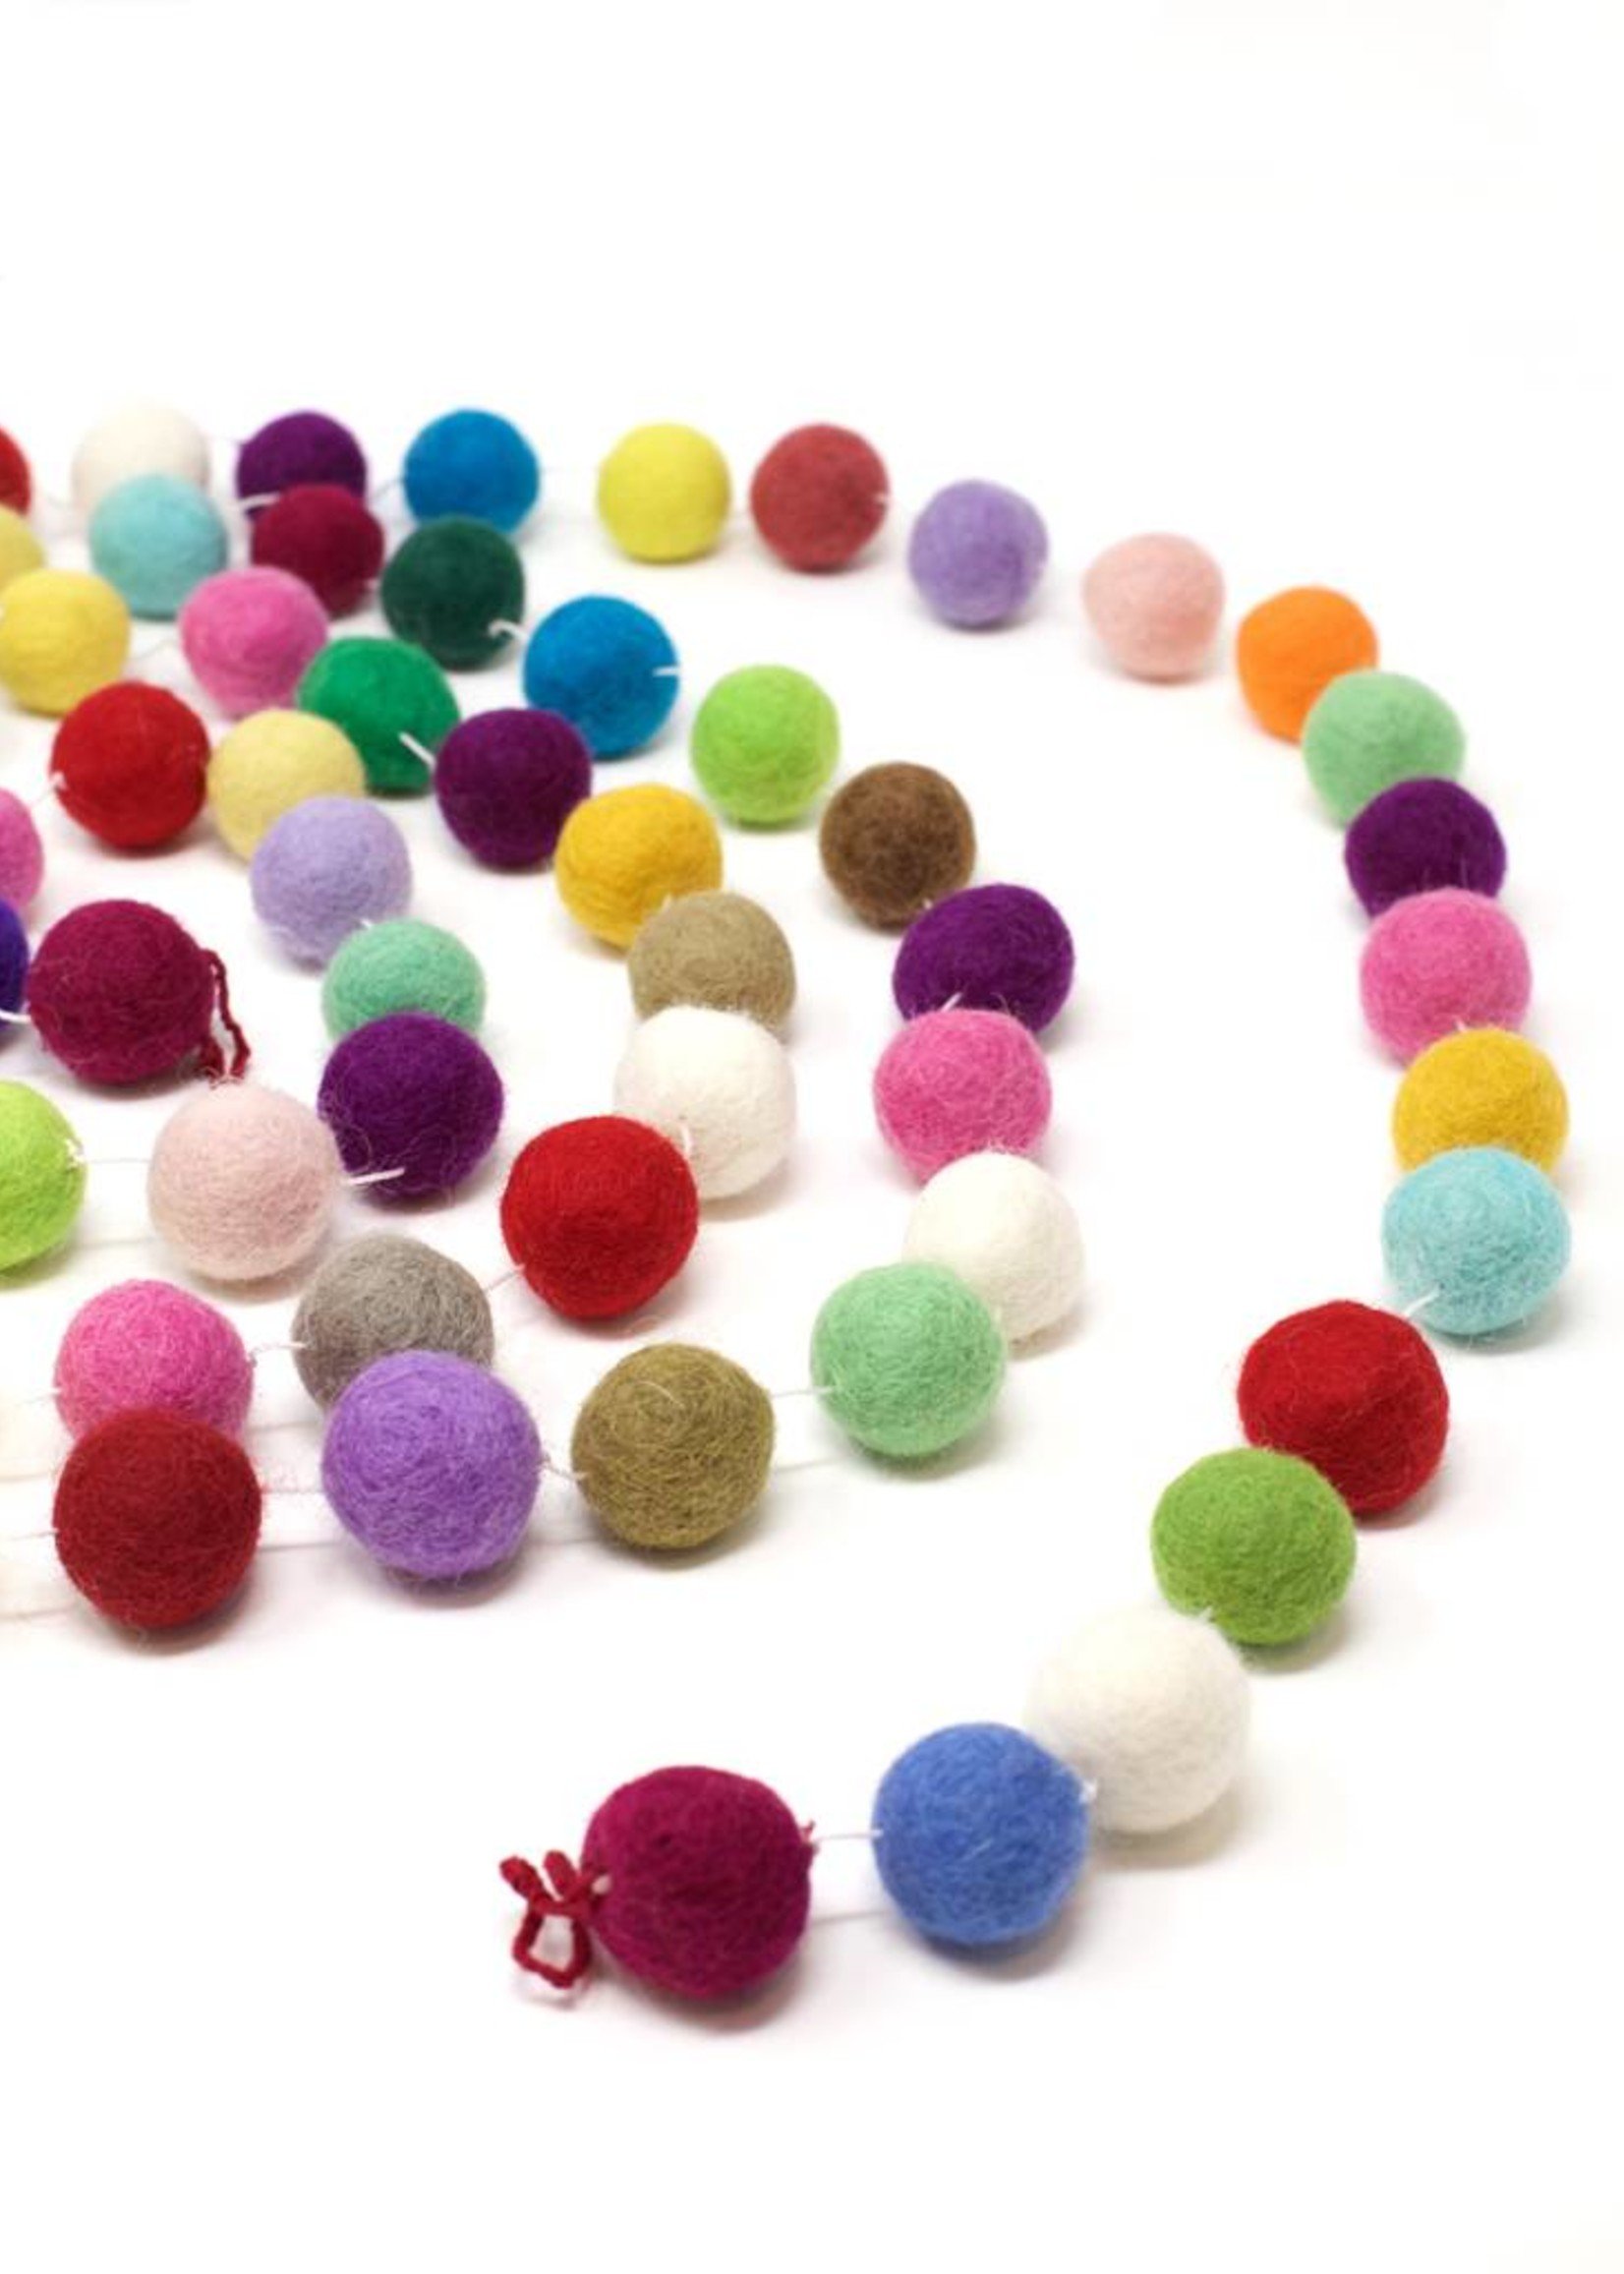 Inozin Felt Pom Pom Balls - Decorative Felting Kit for DIY Arts & Crafts Projects - Pure Woolen Beads for Garlands & Ornaments - Made in Nepal, New